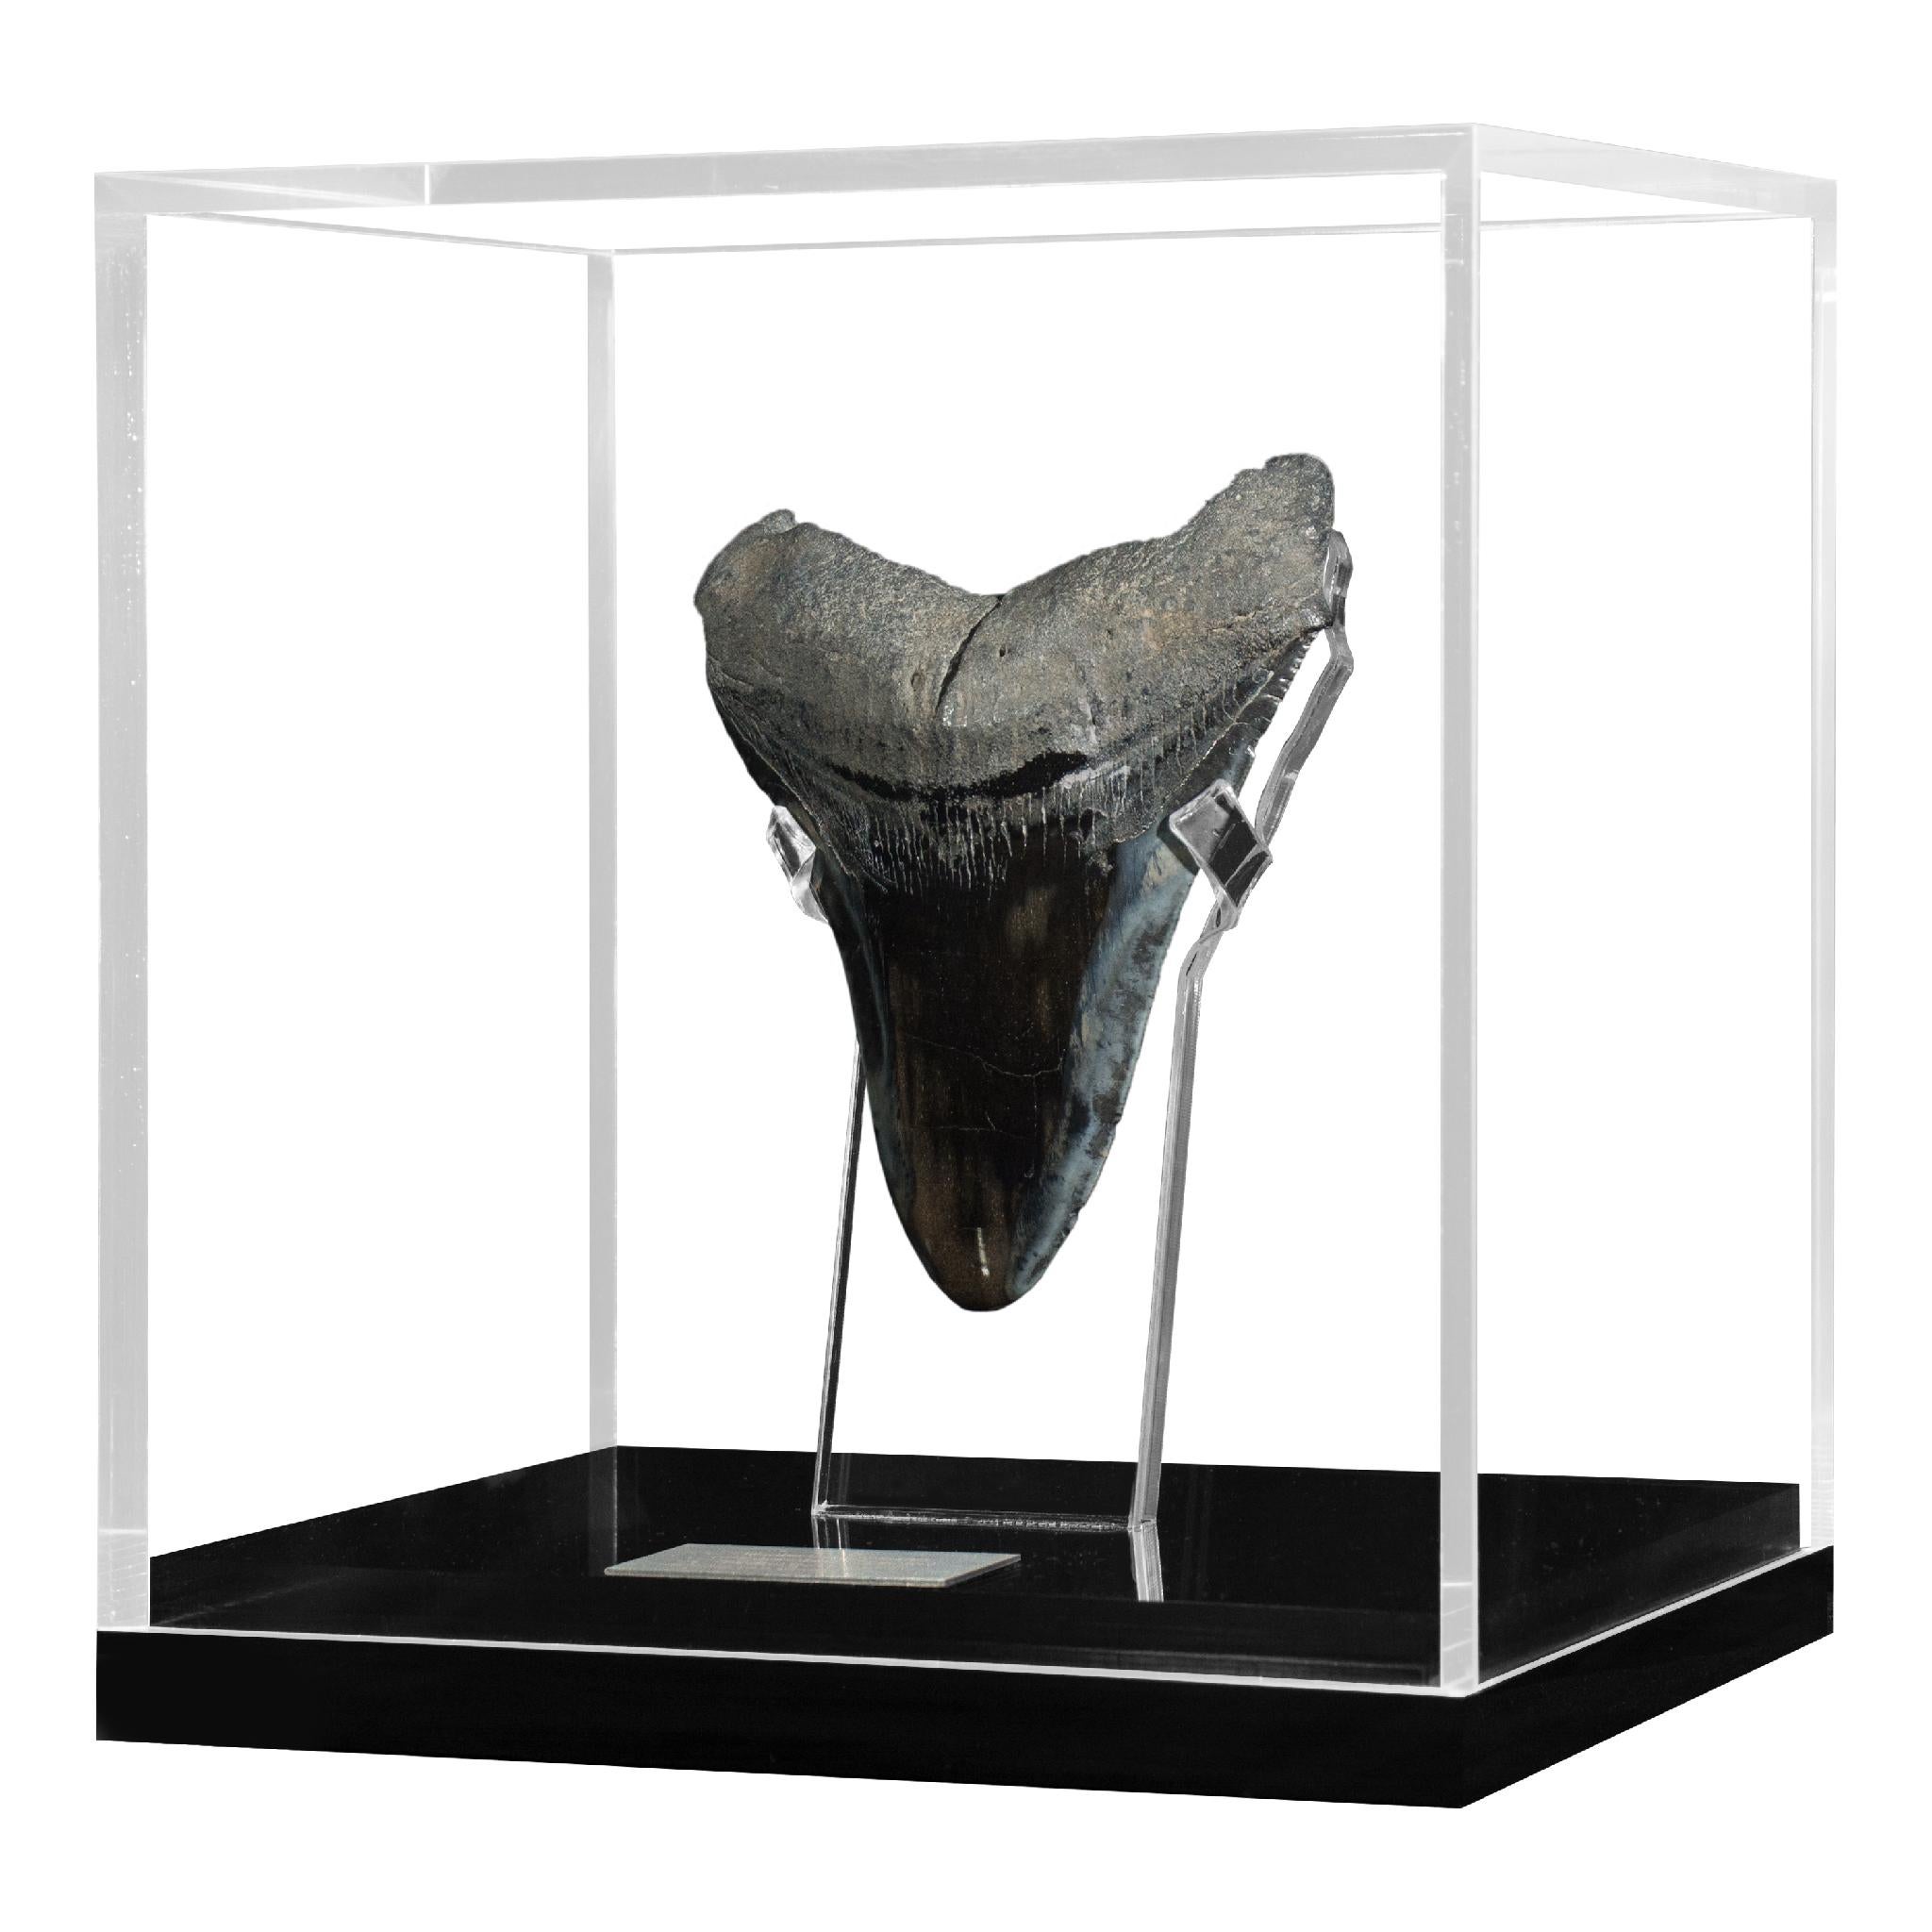 Megalodon, is an extinct species of sharks that lived 10 to 25 million years ago, during the Miocene period.
It´s considered the biggest predator that has ever lived, reaching lengths up to 60 feet and estimated weight of 60 tons. Their jaw could